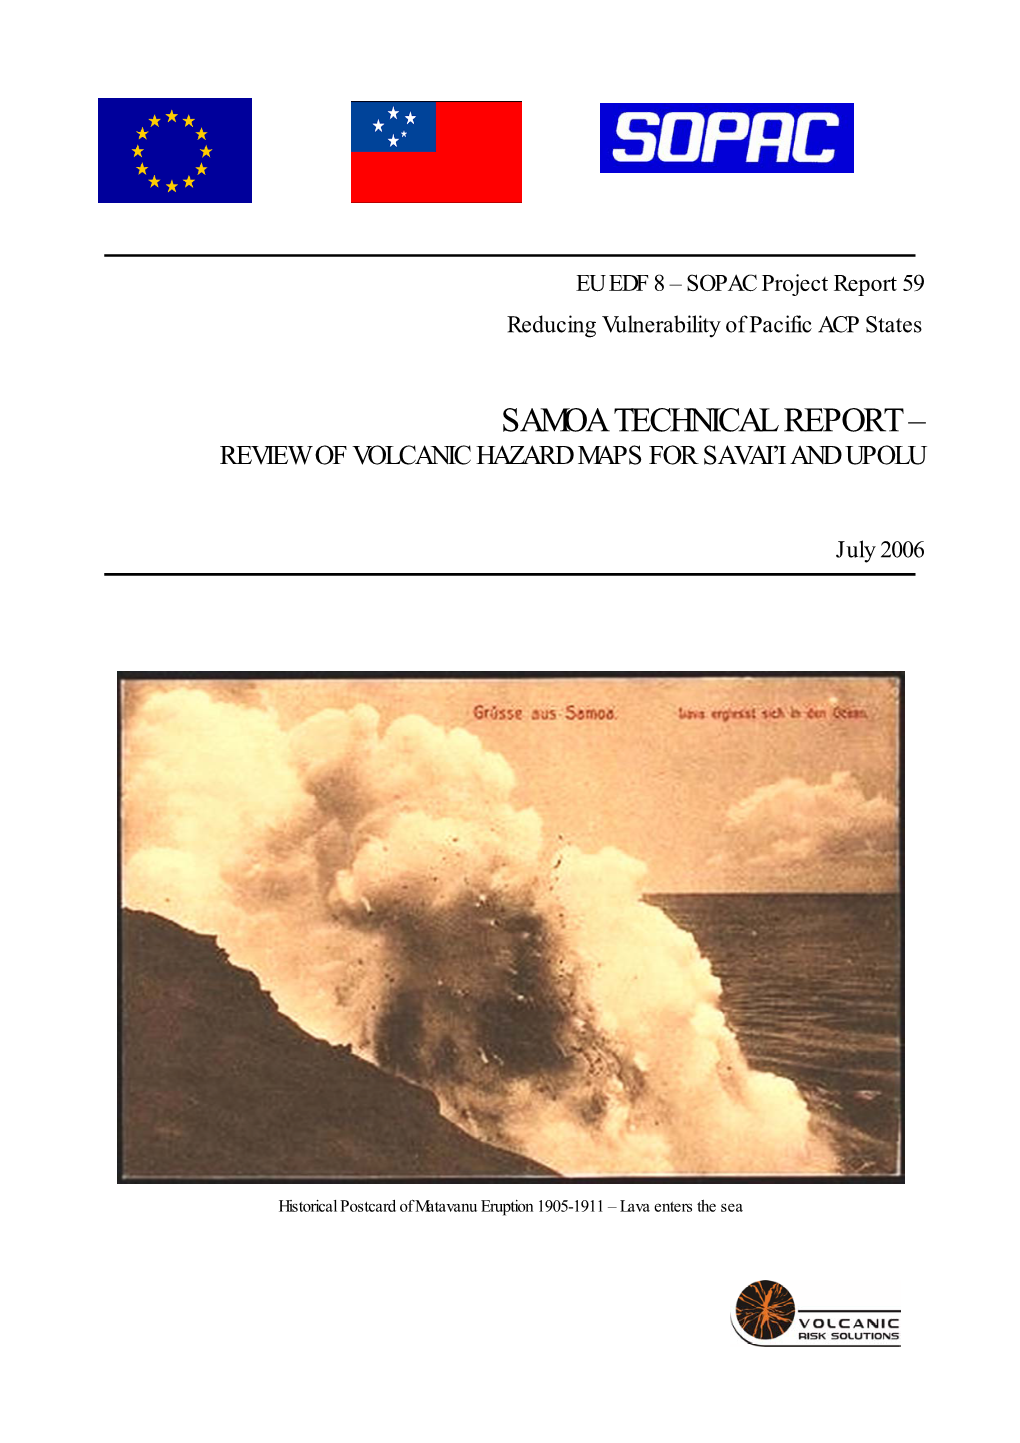 Samoa Technical Report – Review of Volcanic Hazard Maps for Savai’I and Upolu